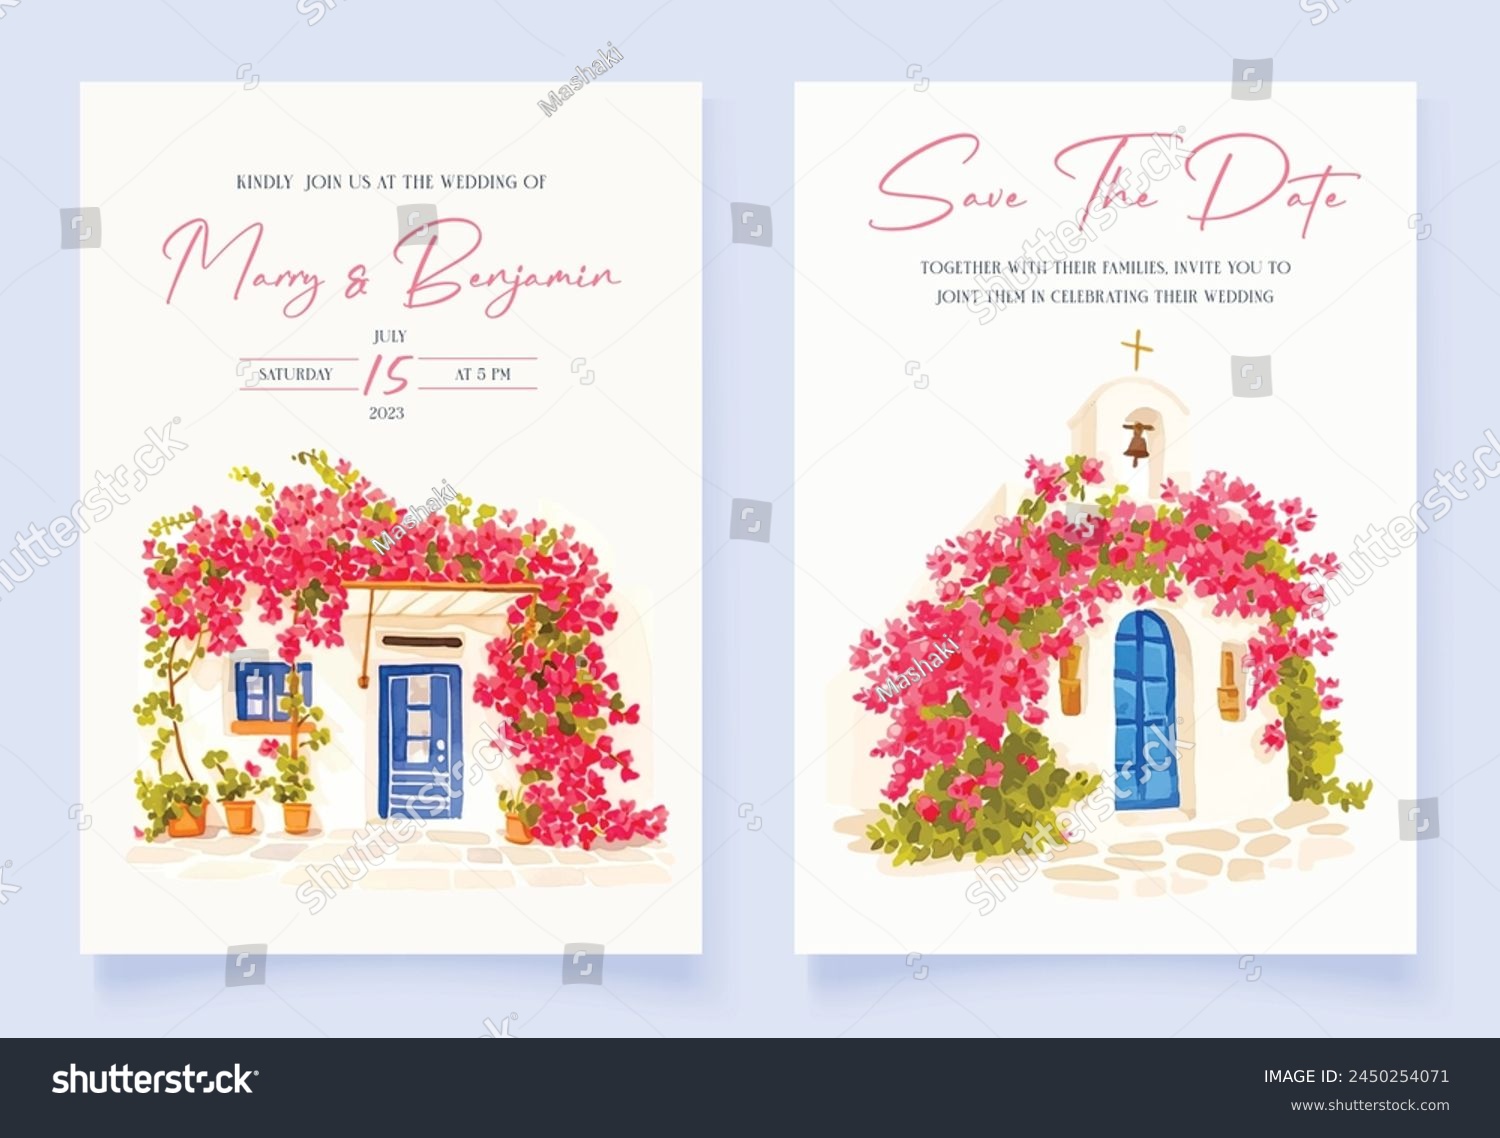 SVG of Wedding invitation with hand drawn watercolor spring pink bougainvillea flower background svg